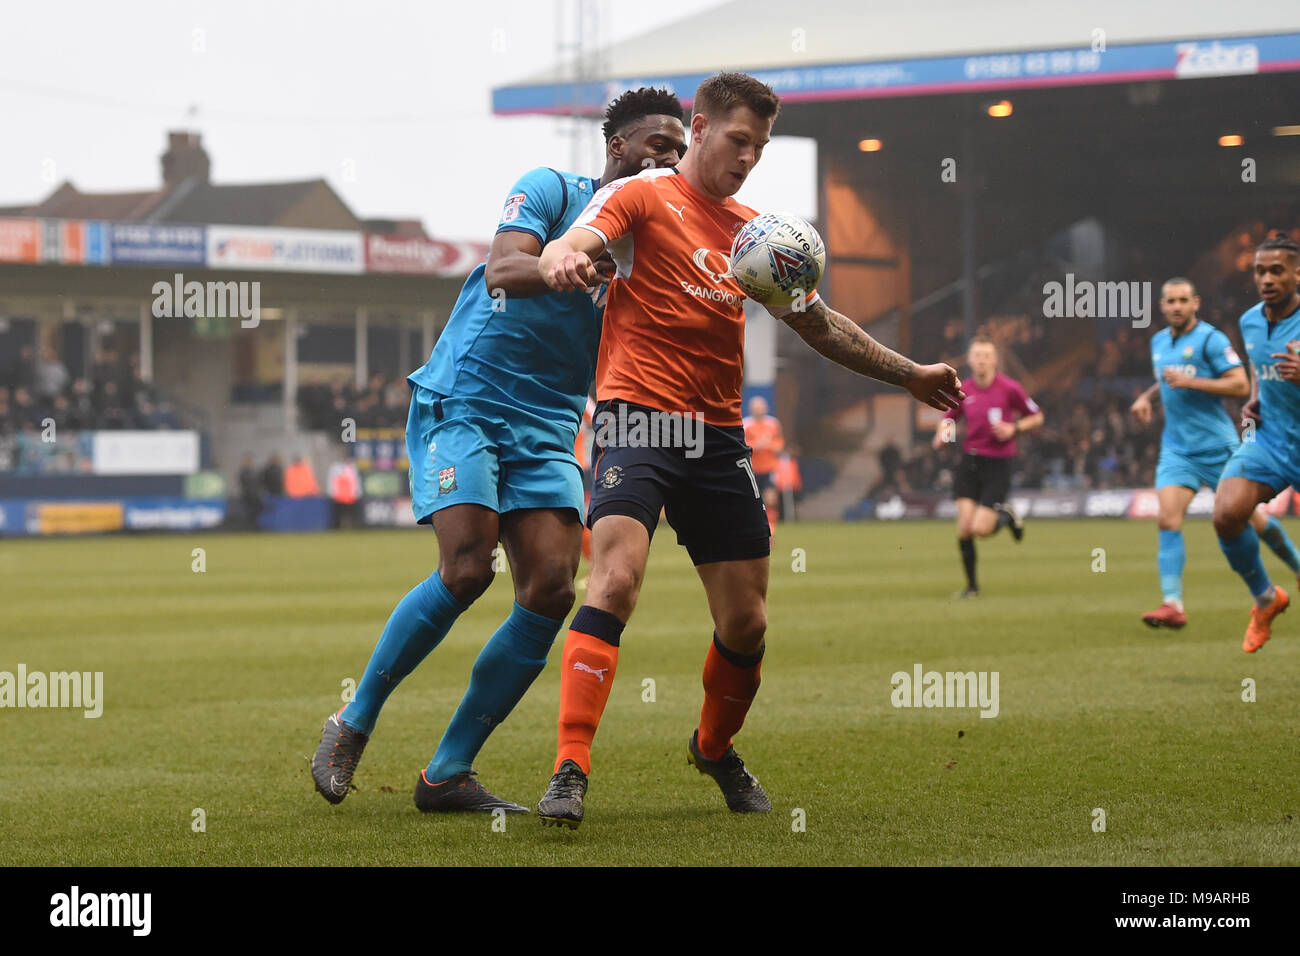 Luton Town's James Collins shields the ball from Barnet's Ricardo Almeida Santos during the Sky Bet League Two match at Kenilworth Road, Luton. Stock Photo